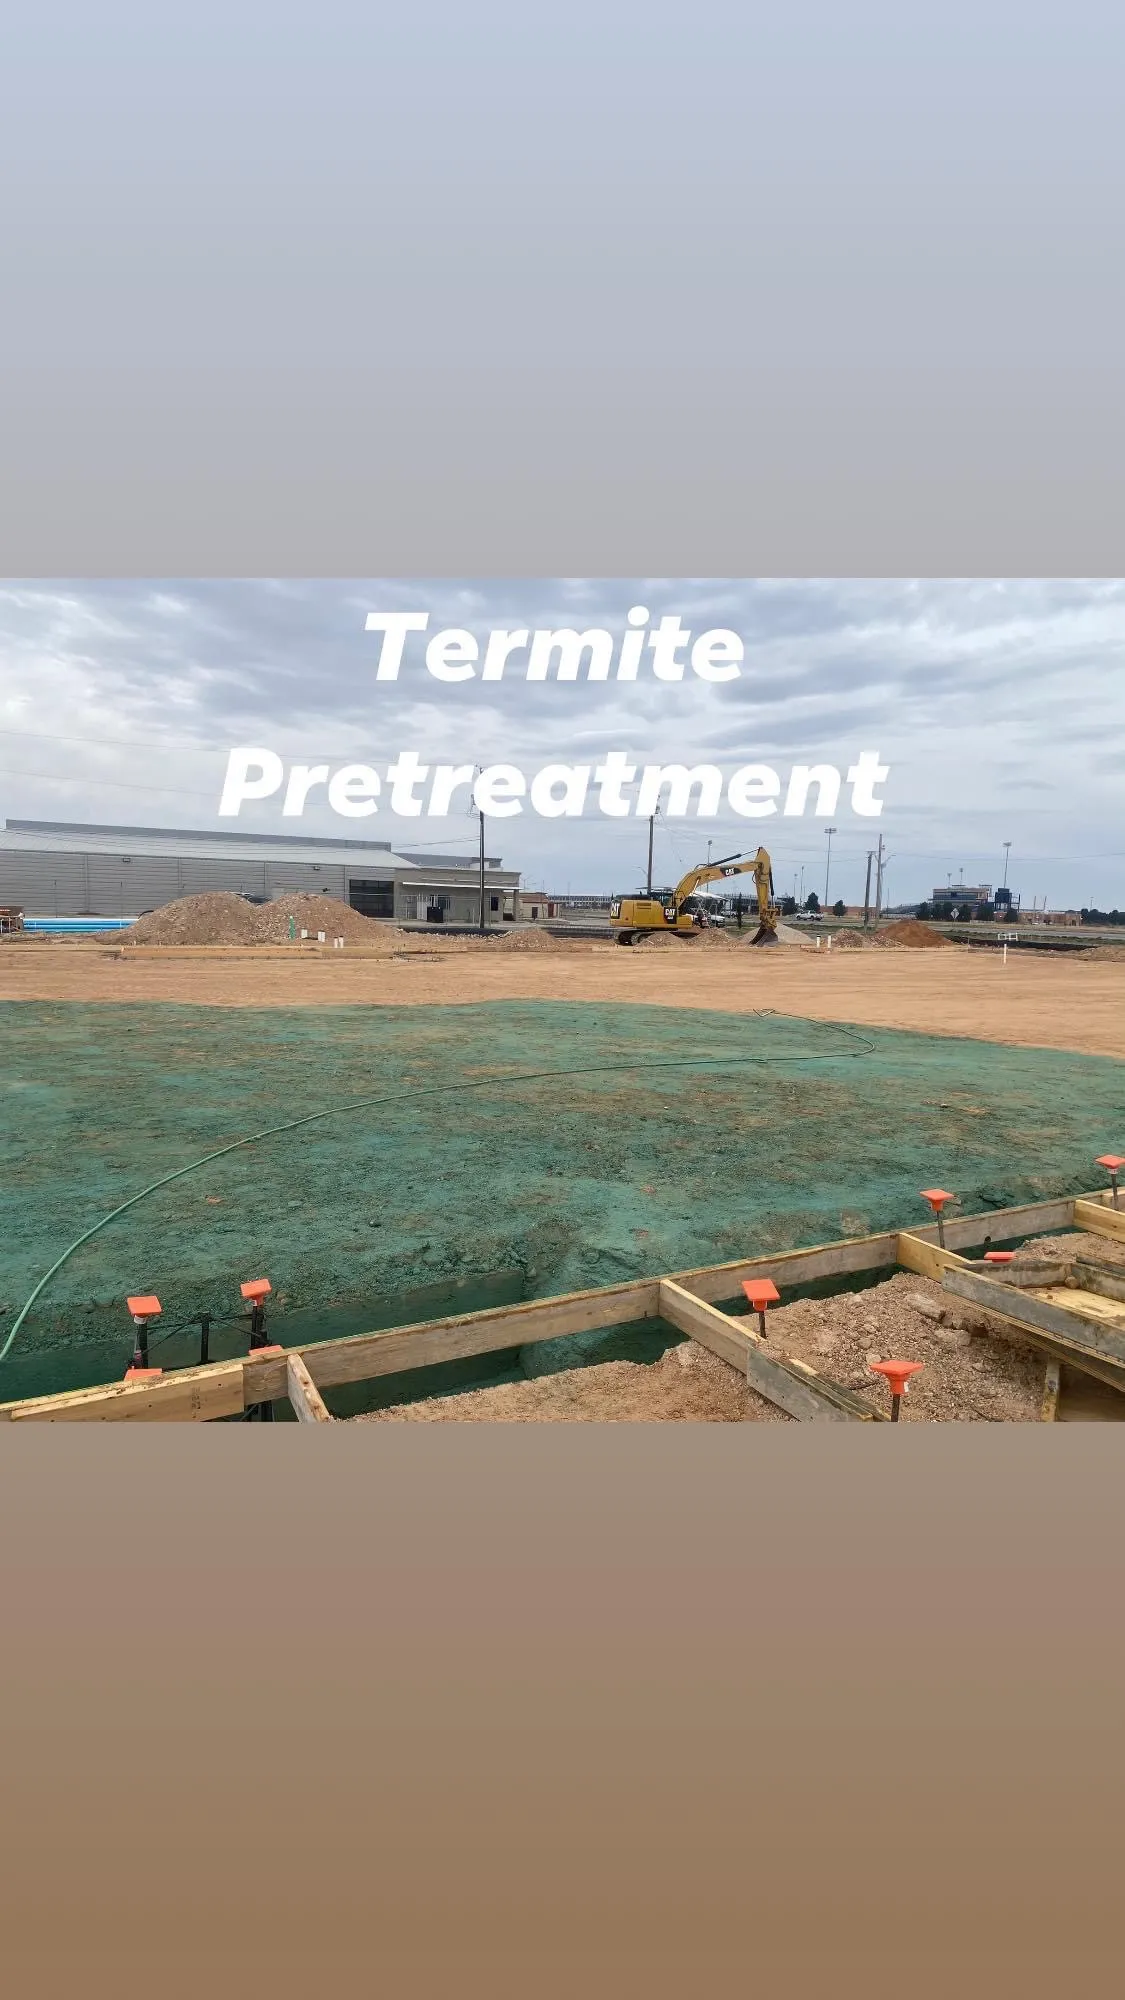 Termite Pretreatment for Maverick Weed & Pest Control in All of Texas, TX